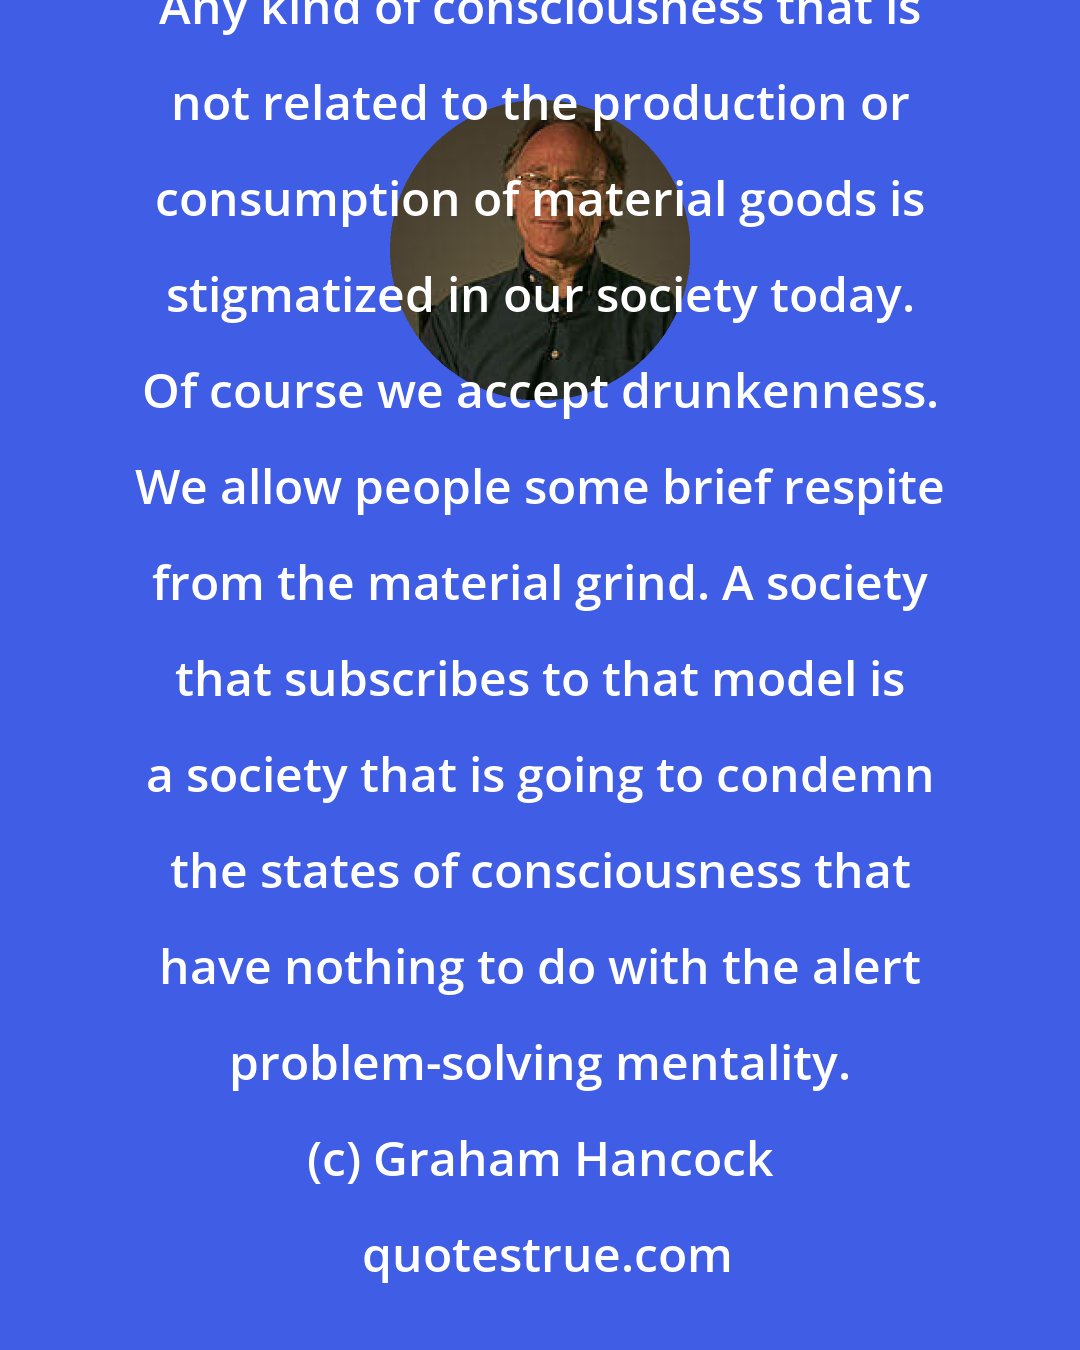 Graham Hancock: Our society values alert, problem-solving consciousness, and it devalues all other states of consciousness. Any kind of consciousness that is not related to the production or consumption of material goods is stigmatized in our society today. Of course we accept drunkenness. We allow people some brief respite from the material grind. A society that subscribes to that model is a society that is going to condemn the states of consciousness that have nothing to do with the alert problem-solving mentality.